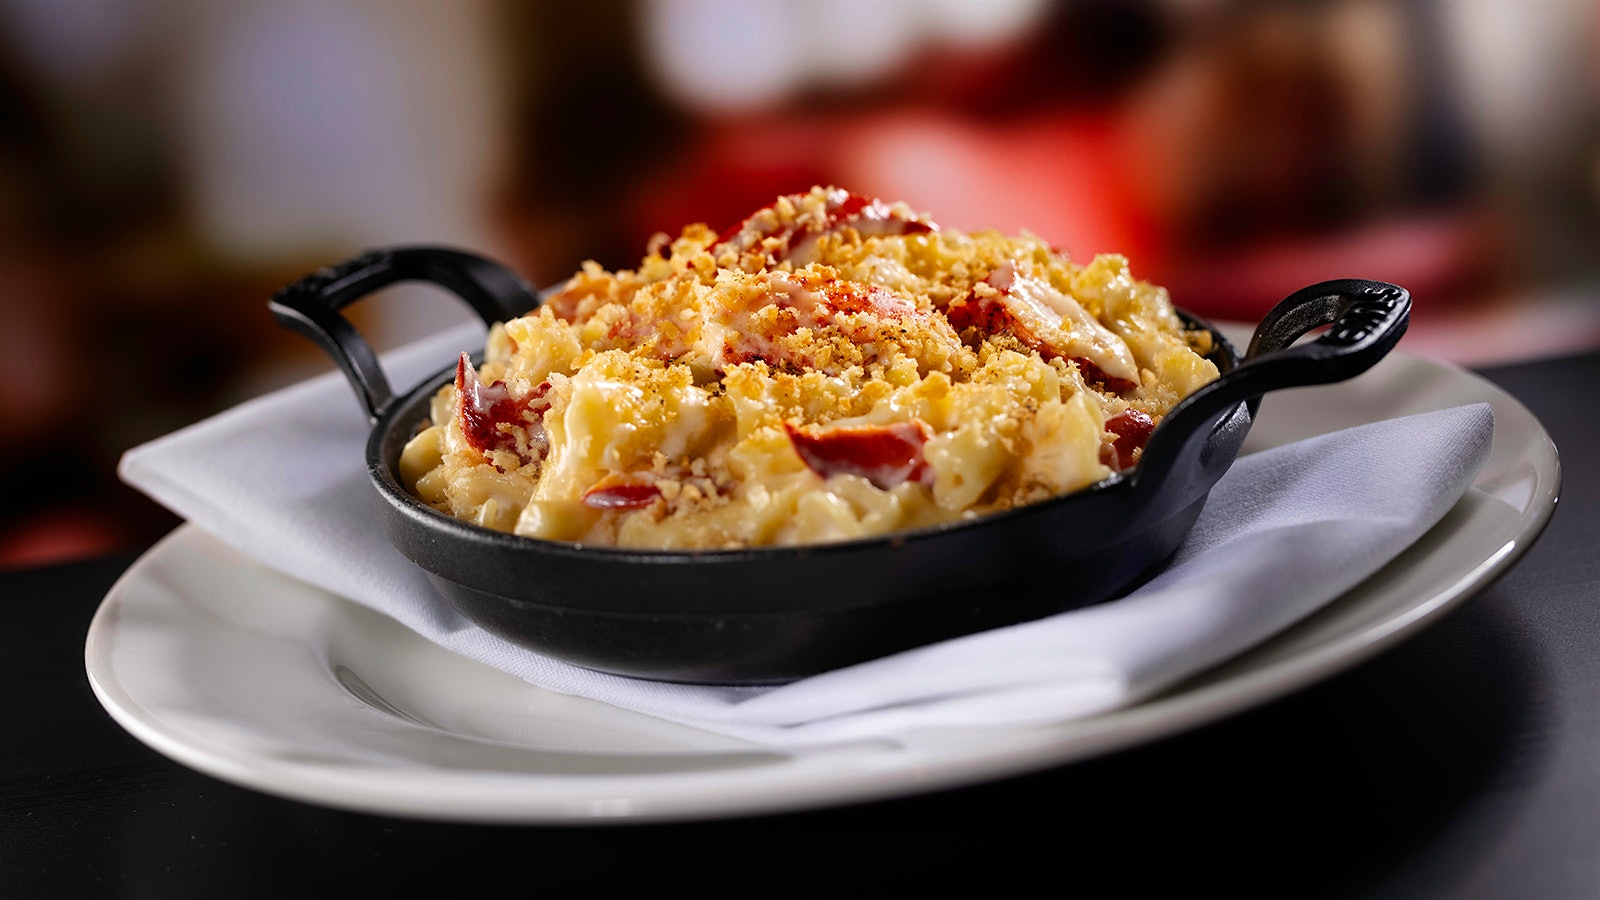  The lobster mac and cheese, served in a cast iron dish.